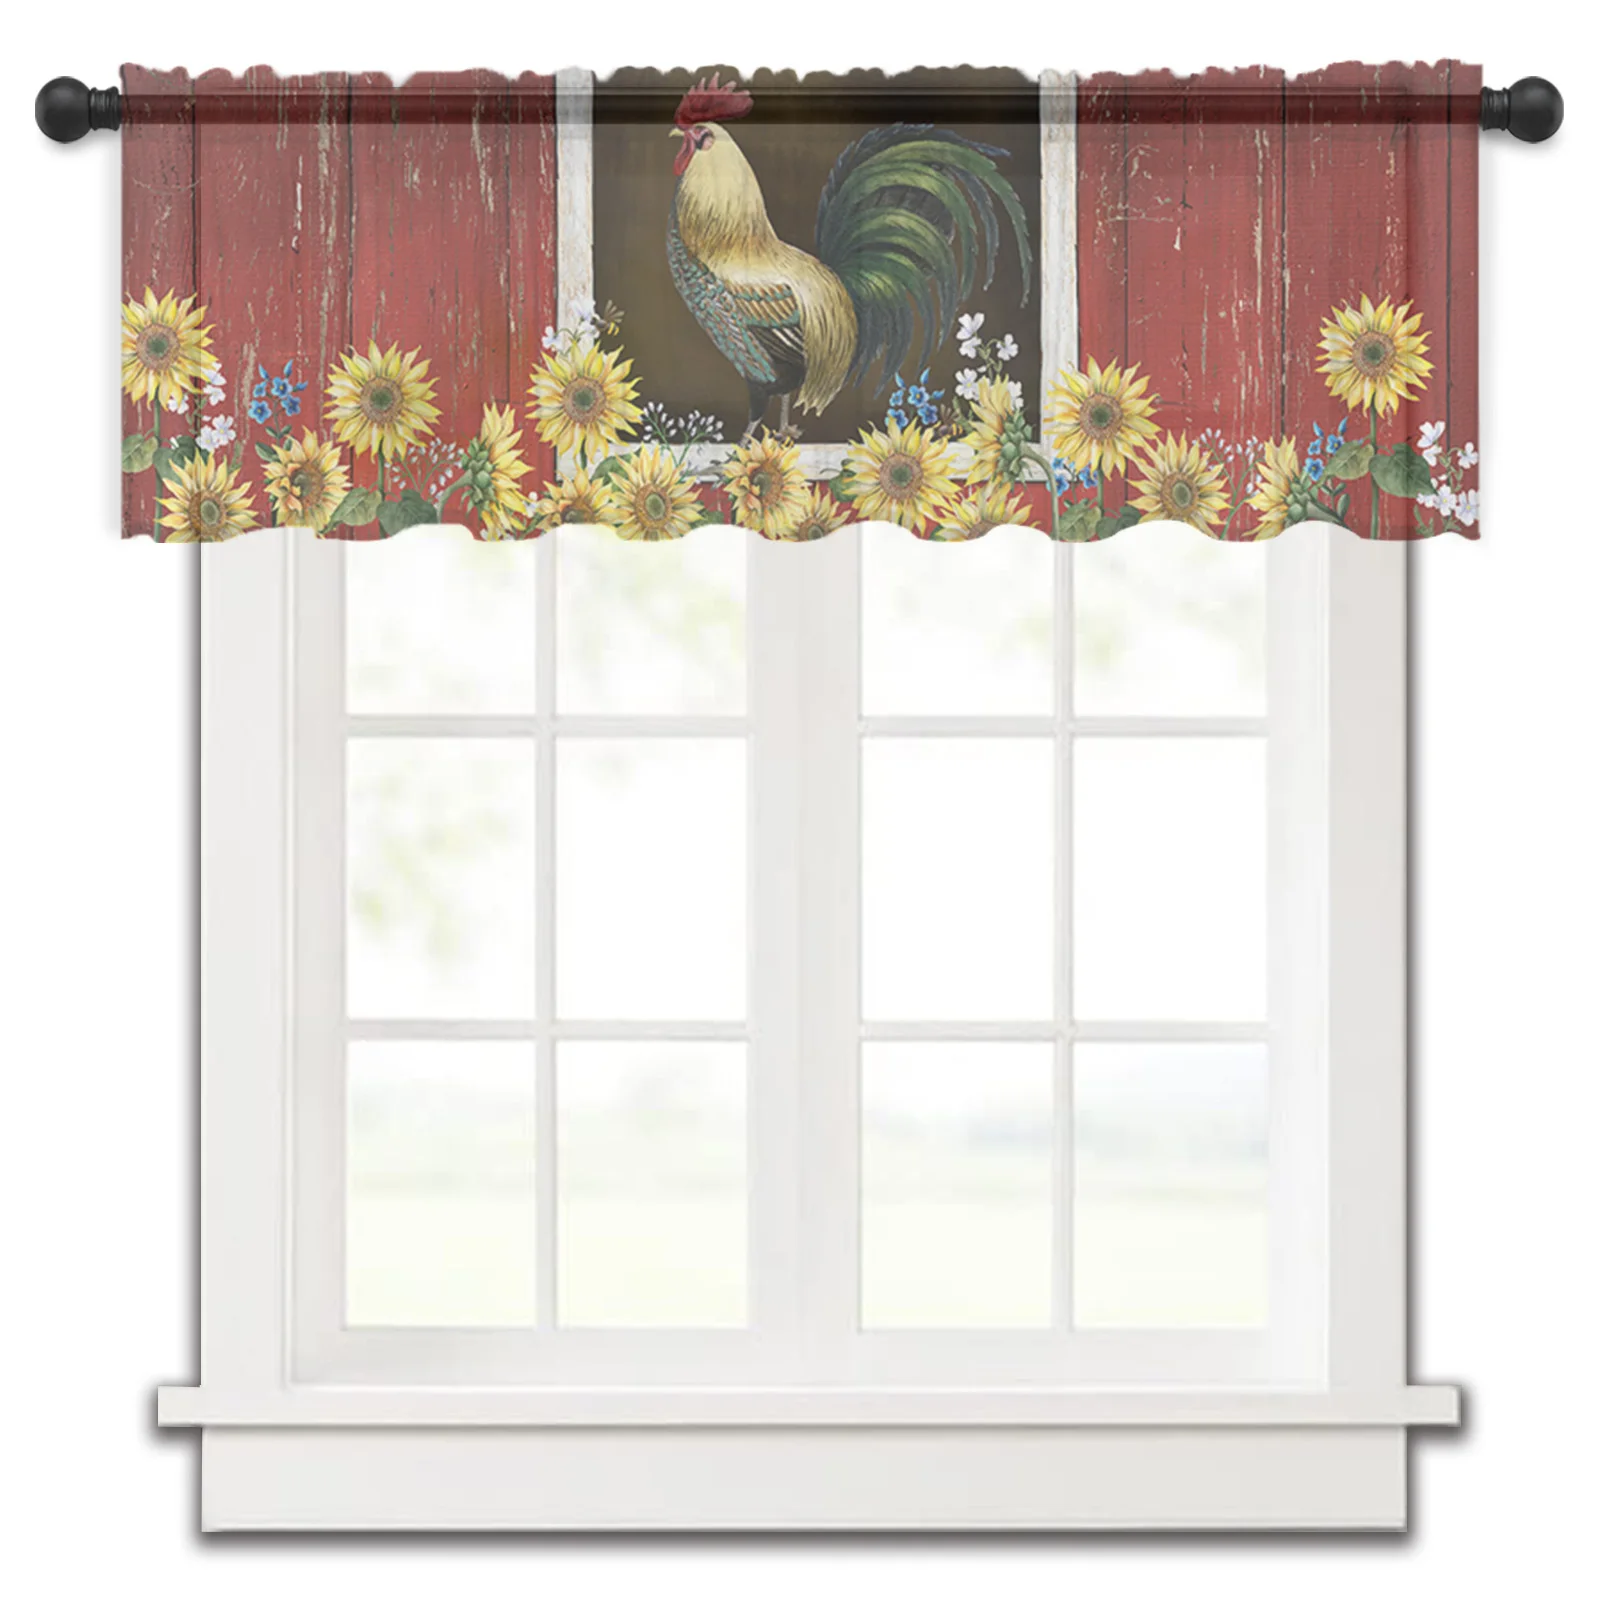 

Chicken Sunflower Farm Barn Kitchen Small Window Curtain Tulle Sheer Short Curtain Bedroom Living Room Home Decor Voile Drapes